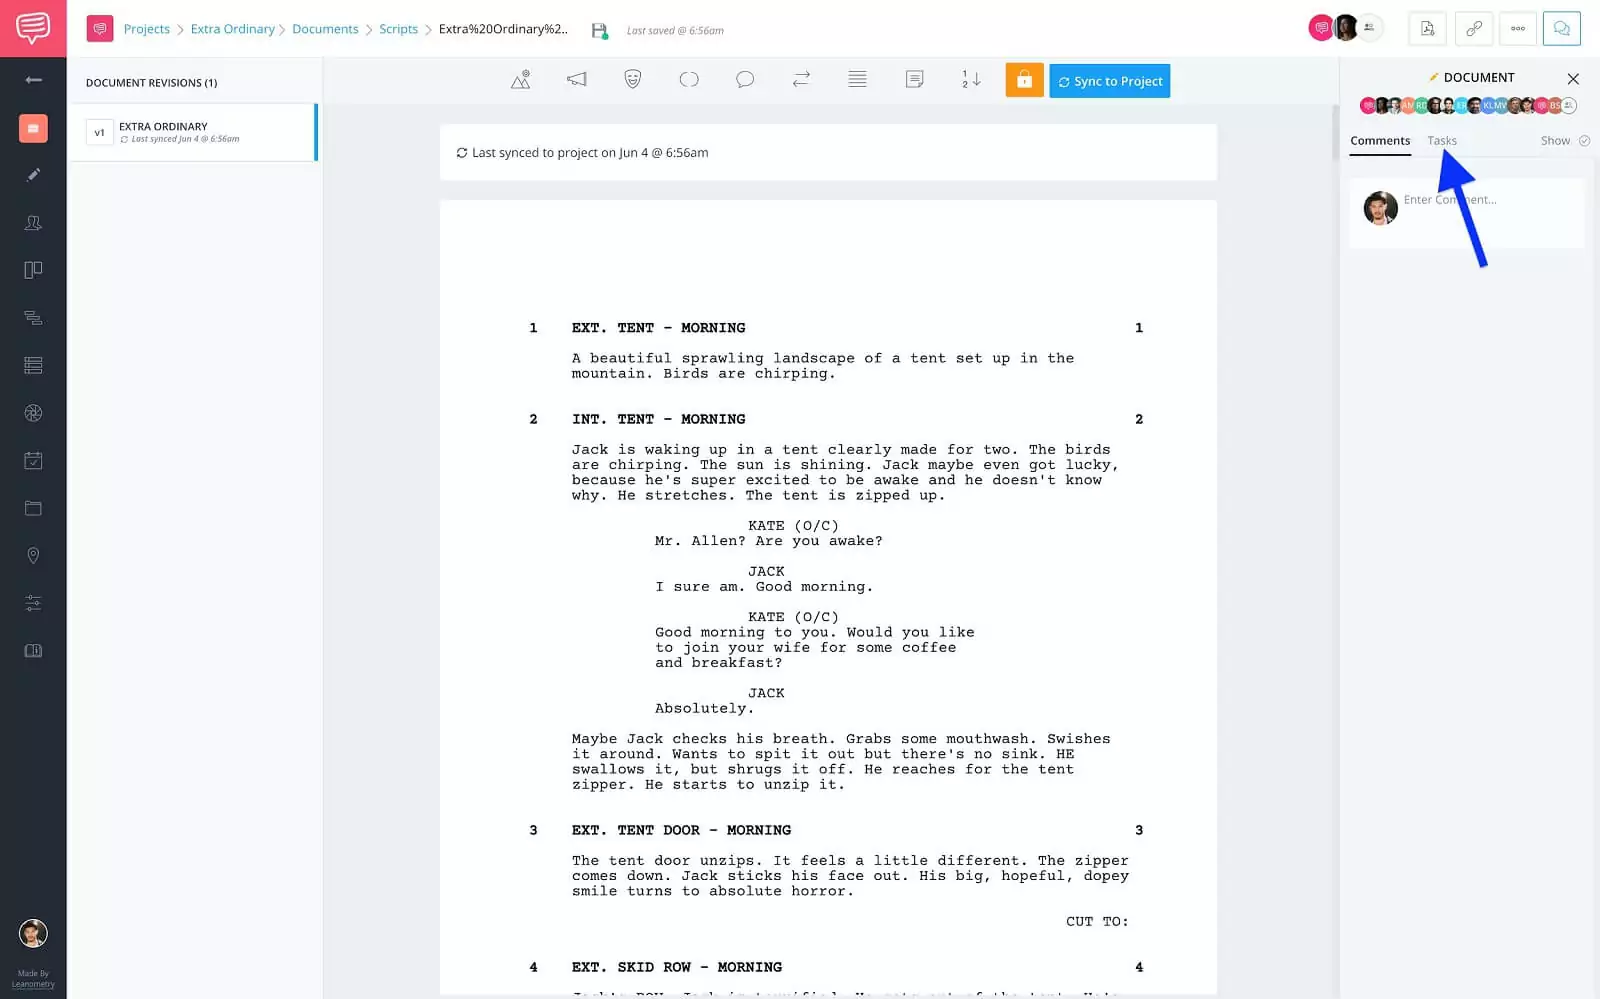 How To Set Up a Project for Success in StudioBinder - Screenwriting Pages - Click Tasks